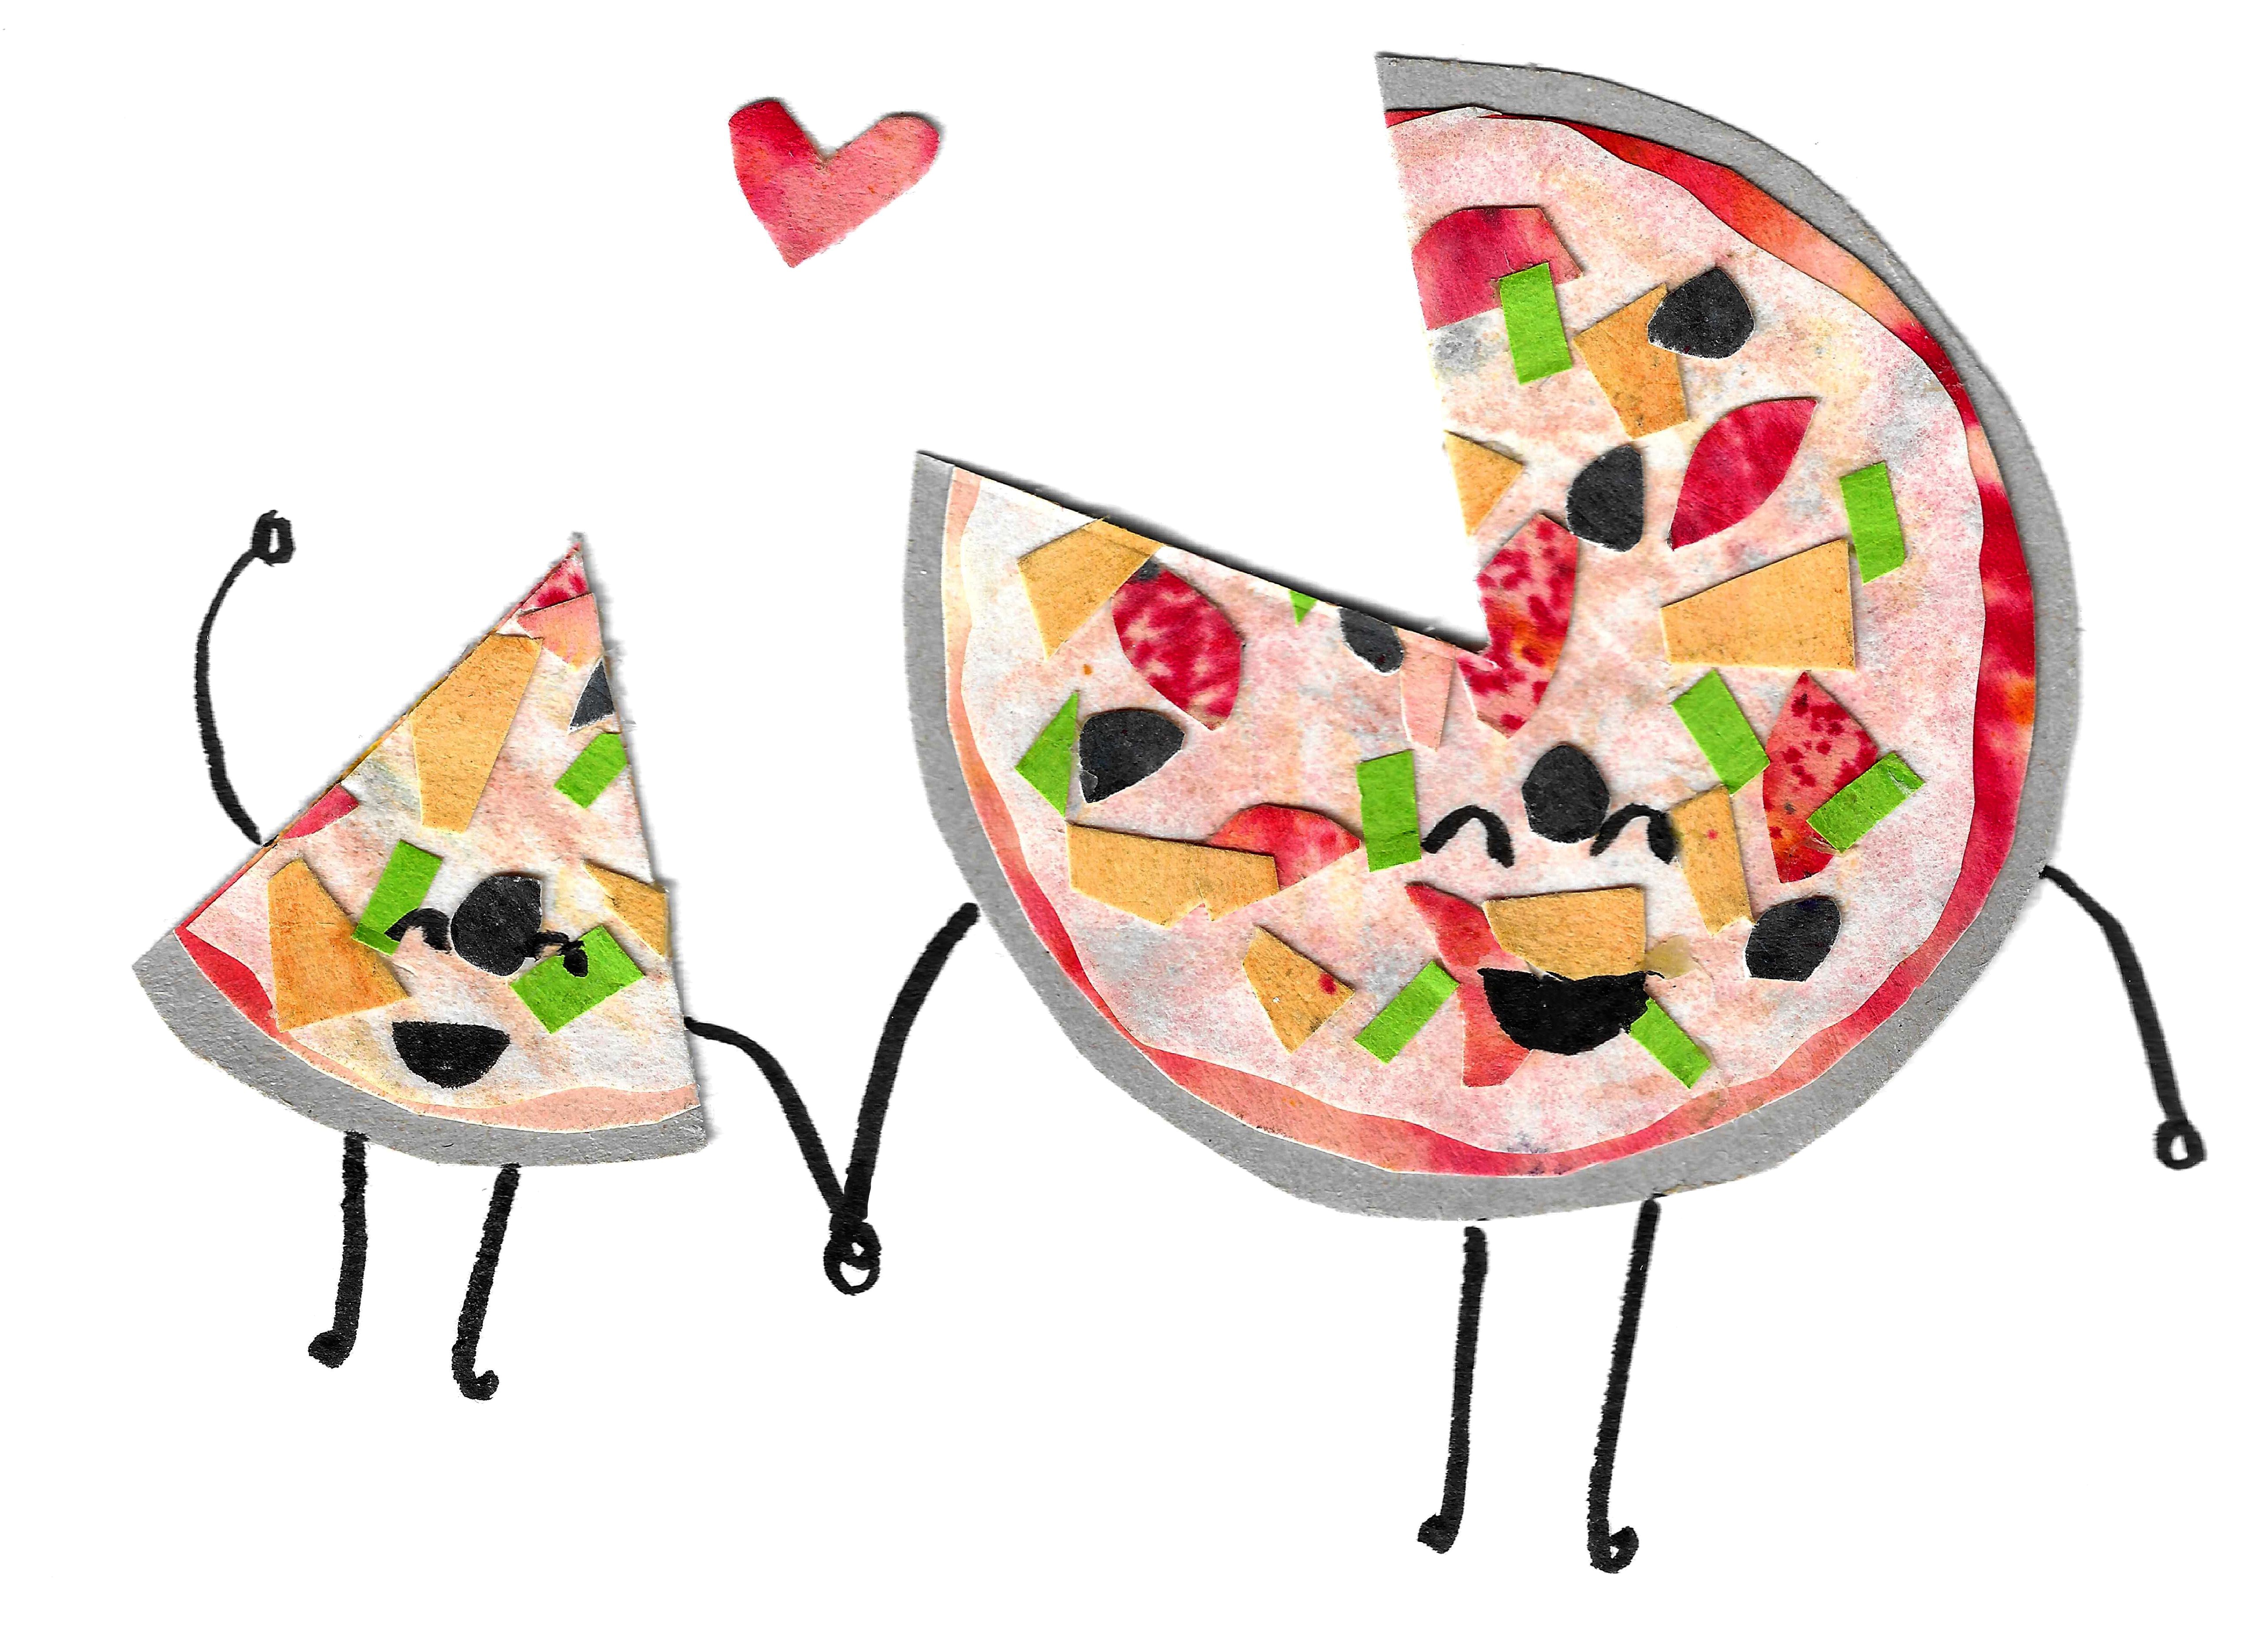 BA Illustration work by Natalie Martinez showing a collage of a pizza holding hands with a pizza slice.